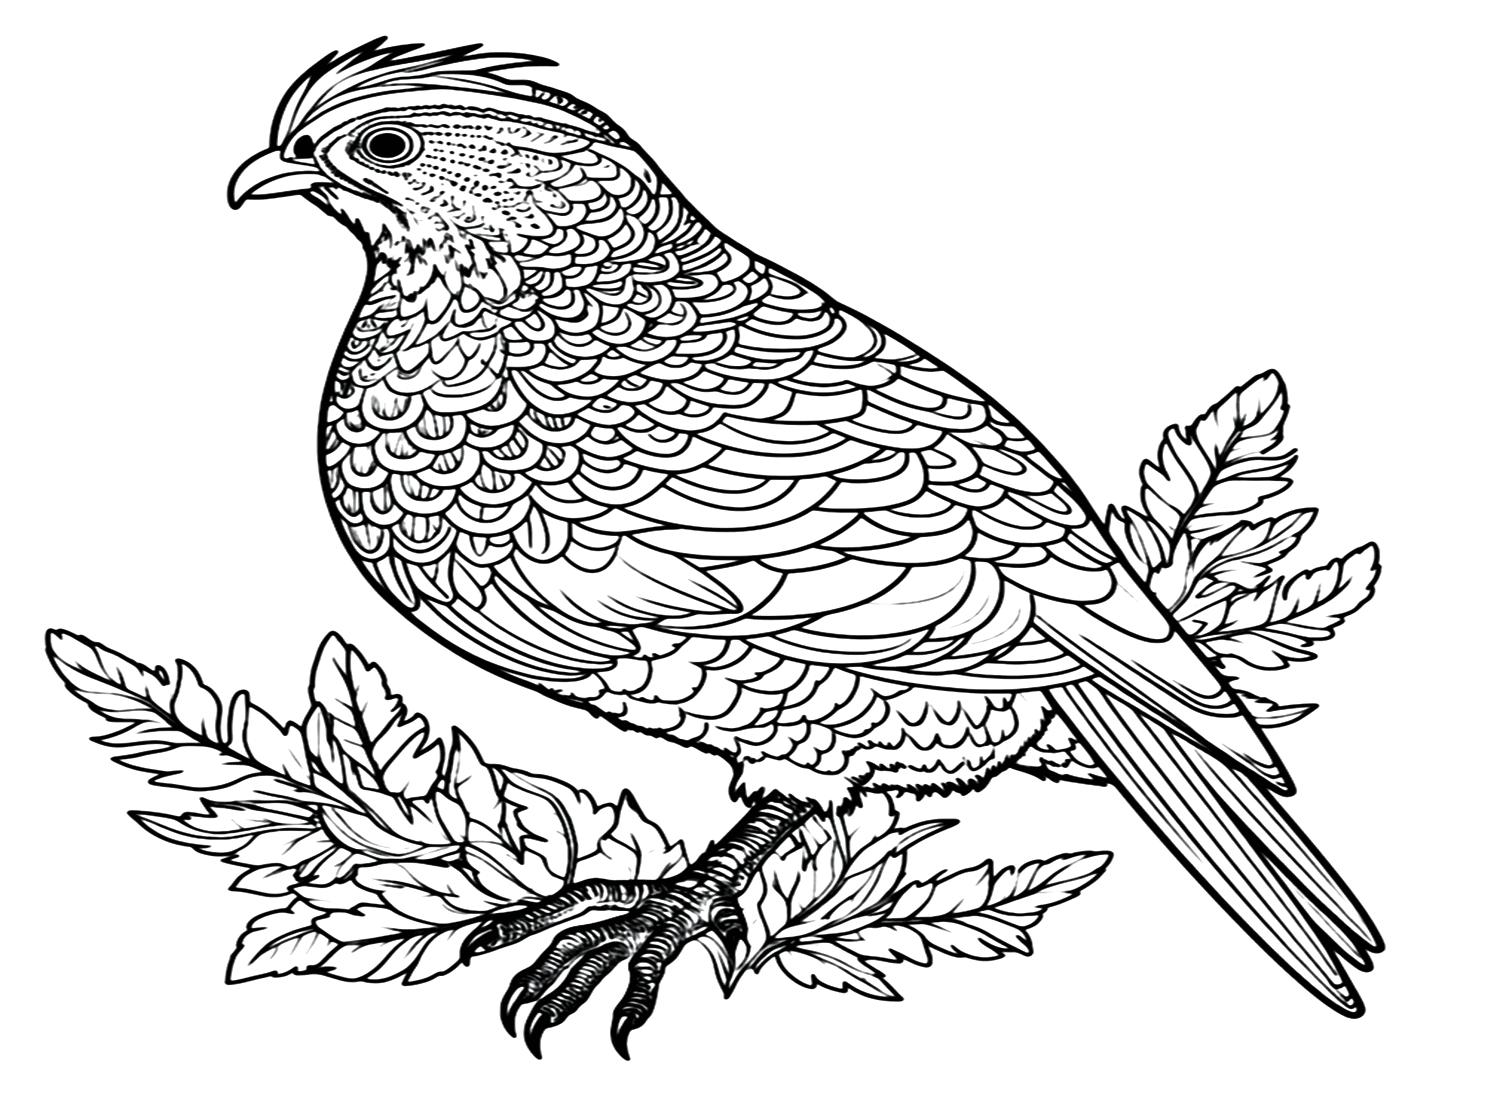 Quail Coloring Page For Adults from Quail